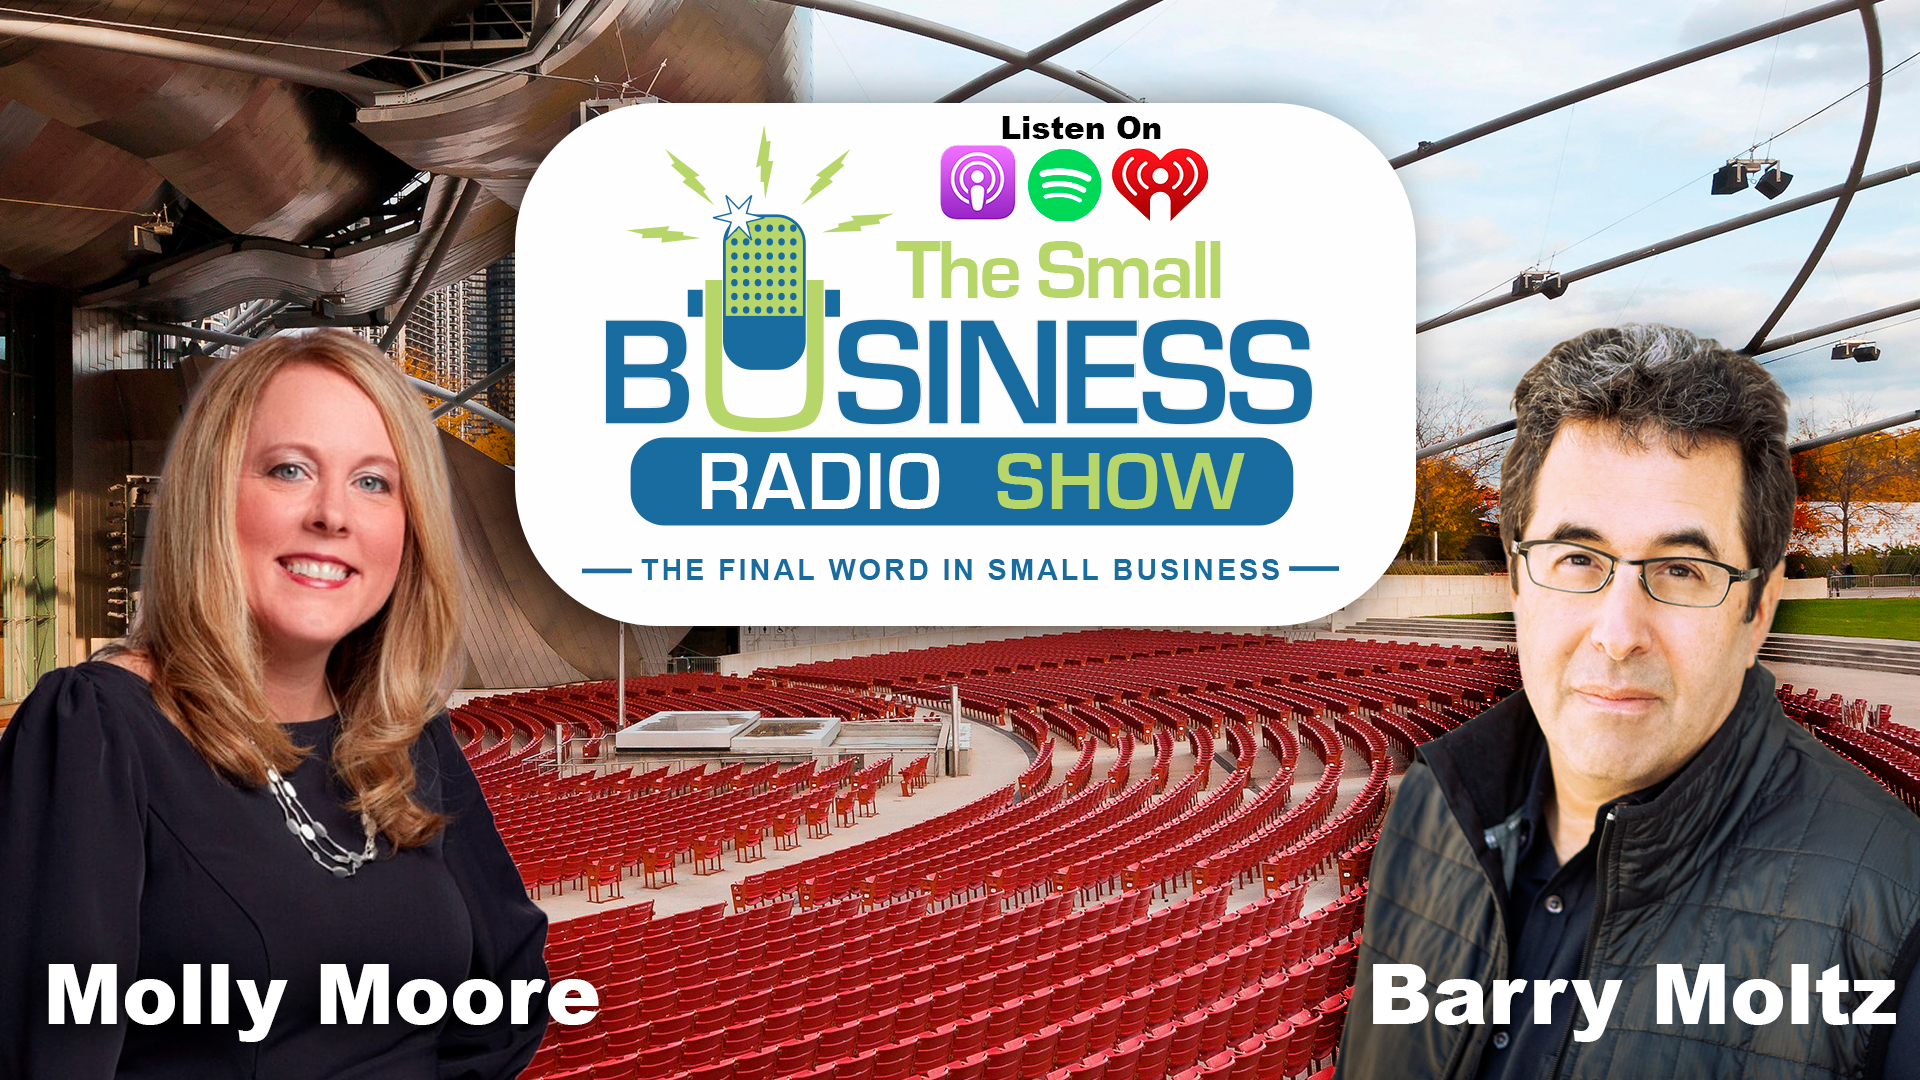 Molly Moore on The Small Business Radio Show